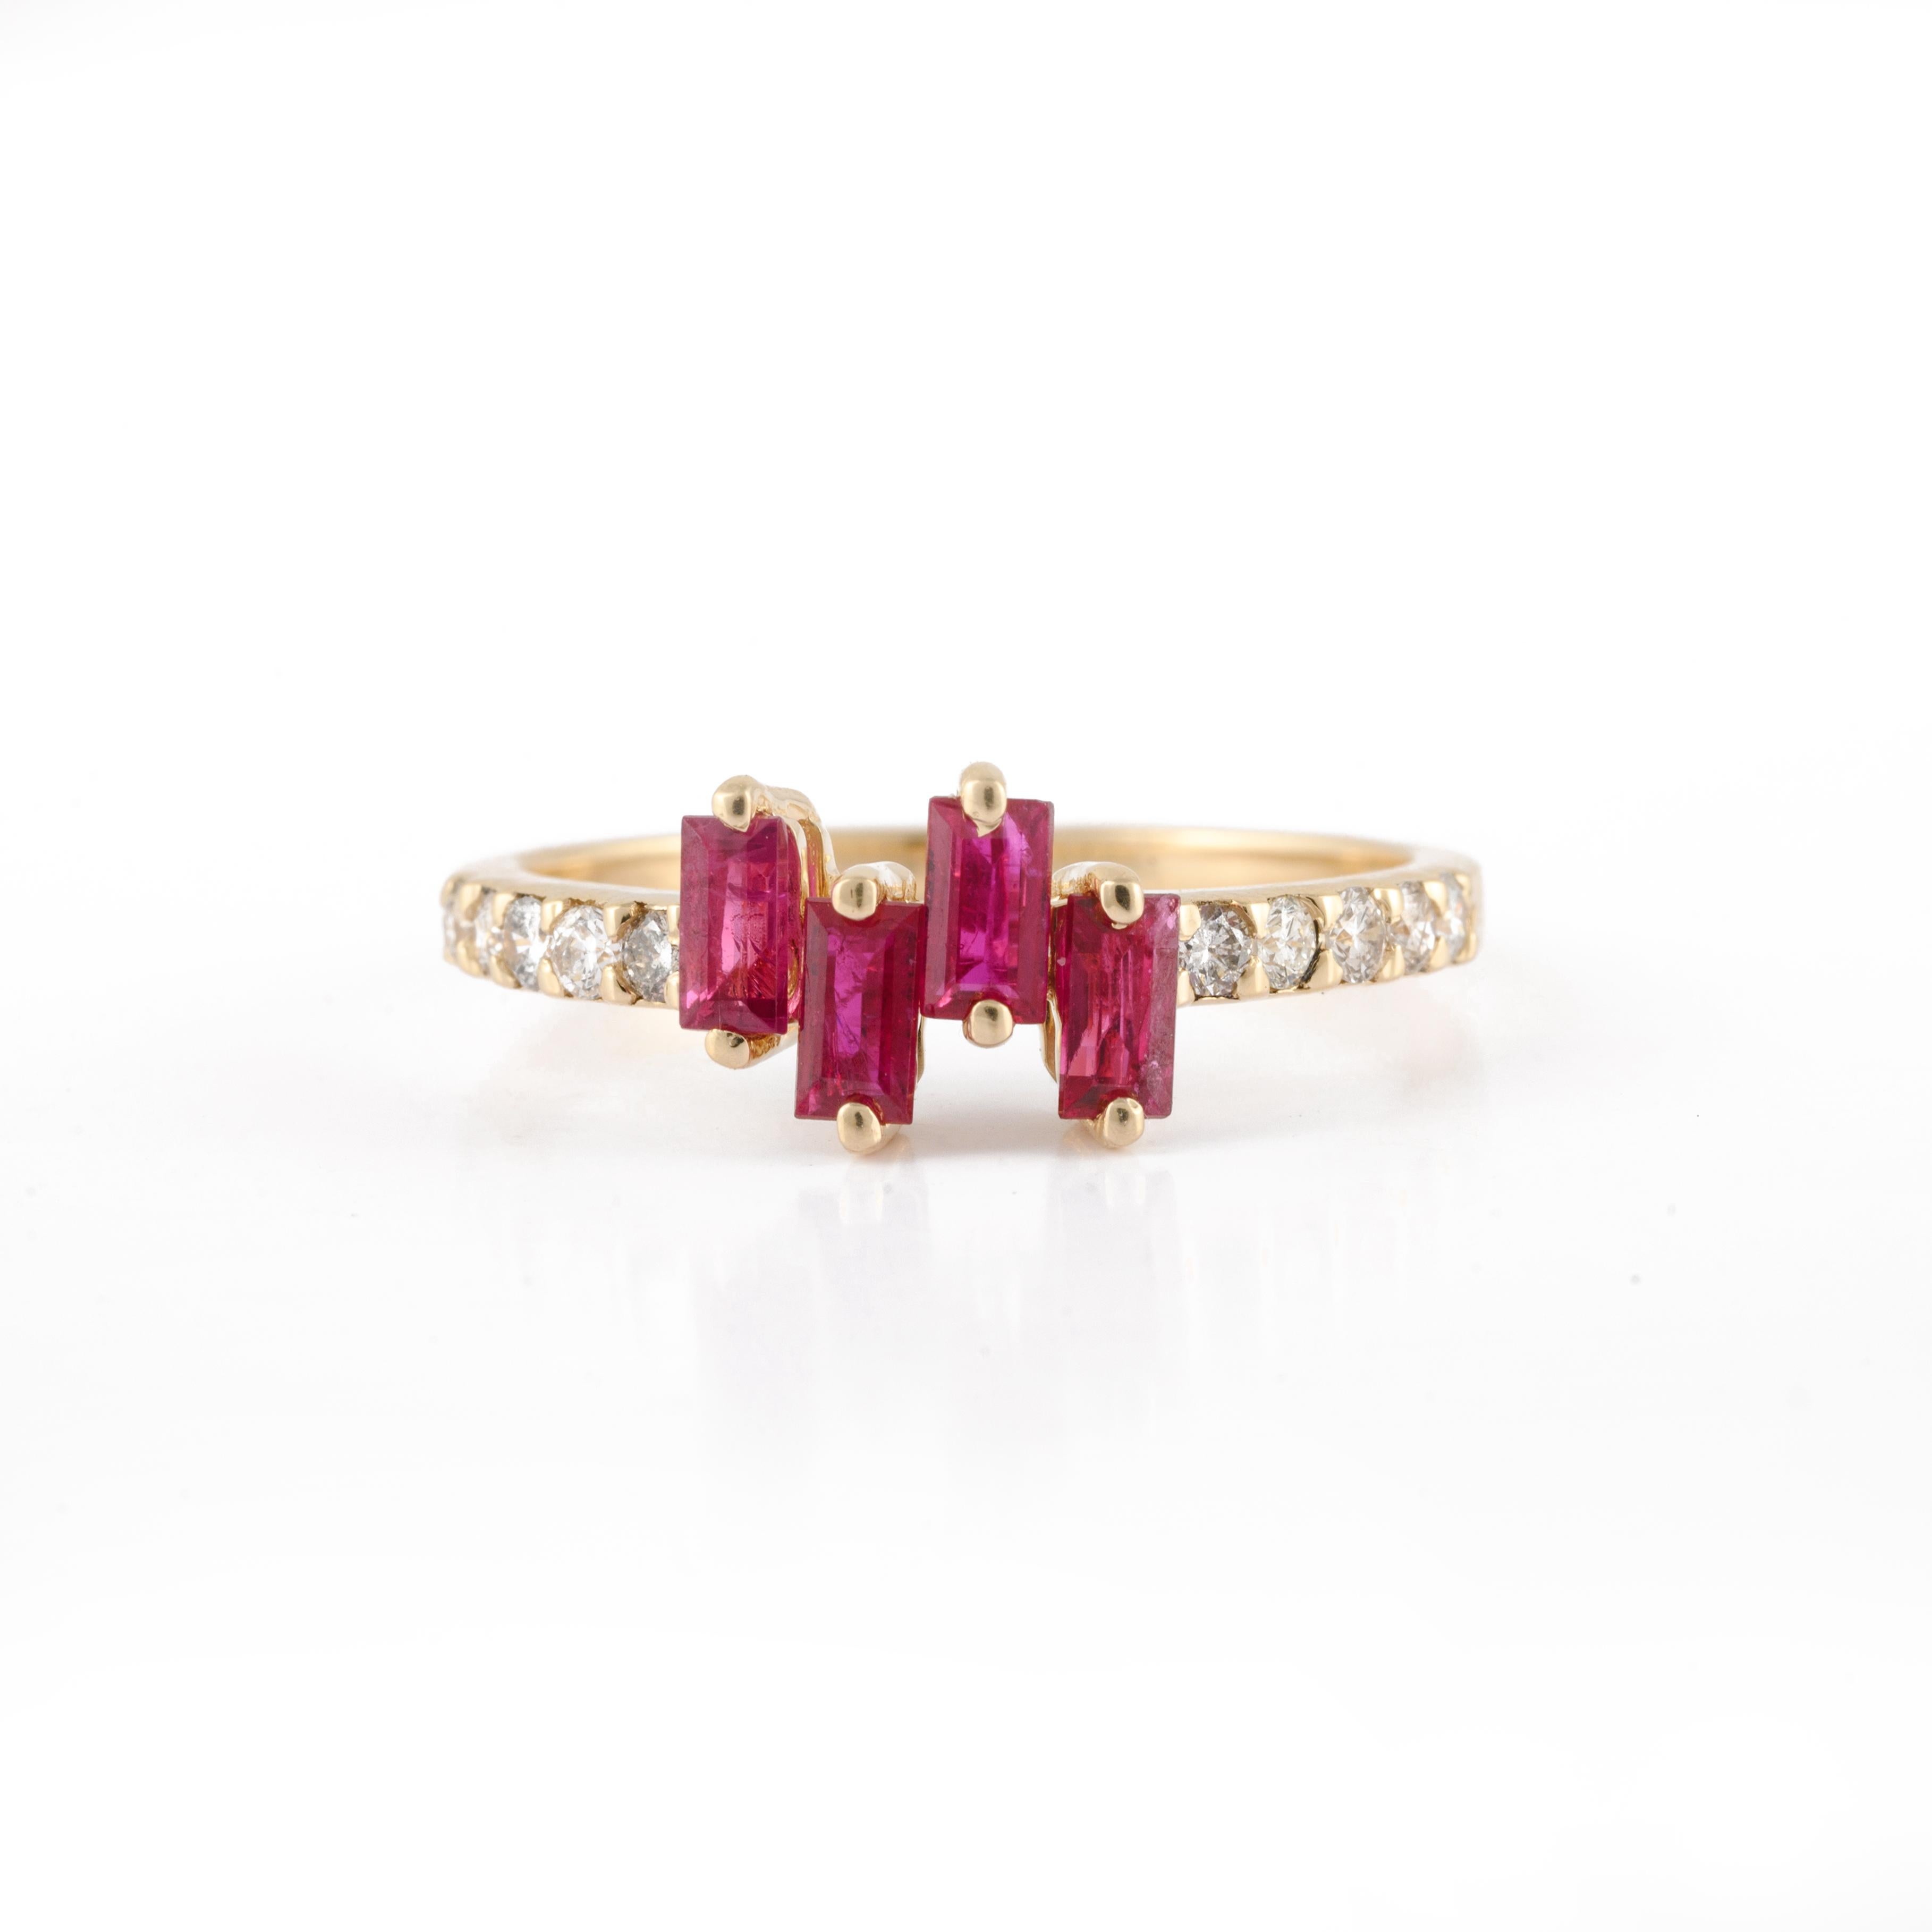 For Sale:  Baguette Ruby Diamond Ring Gift for Her in 14k Solid Yellow Gold 4